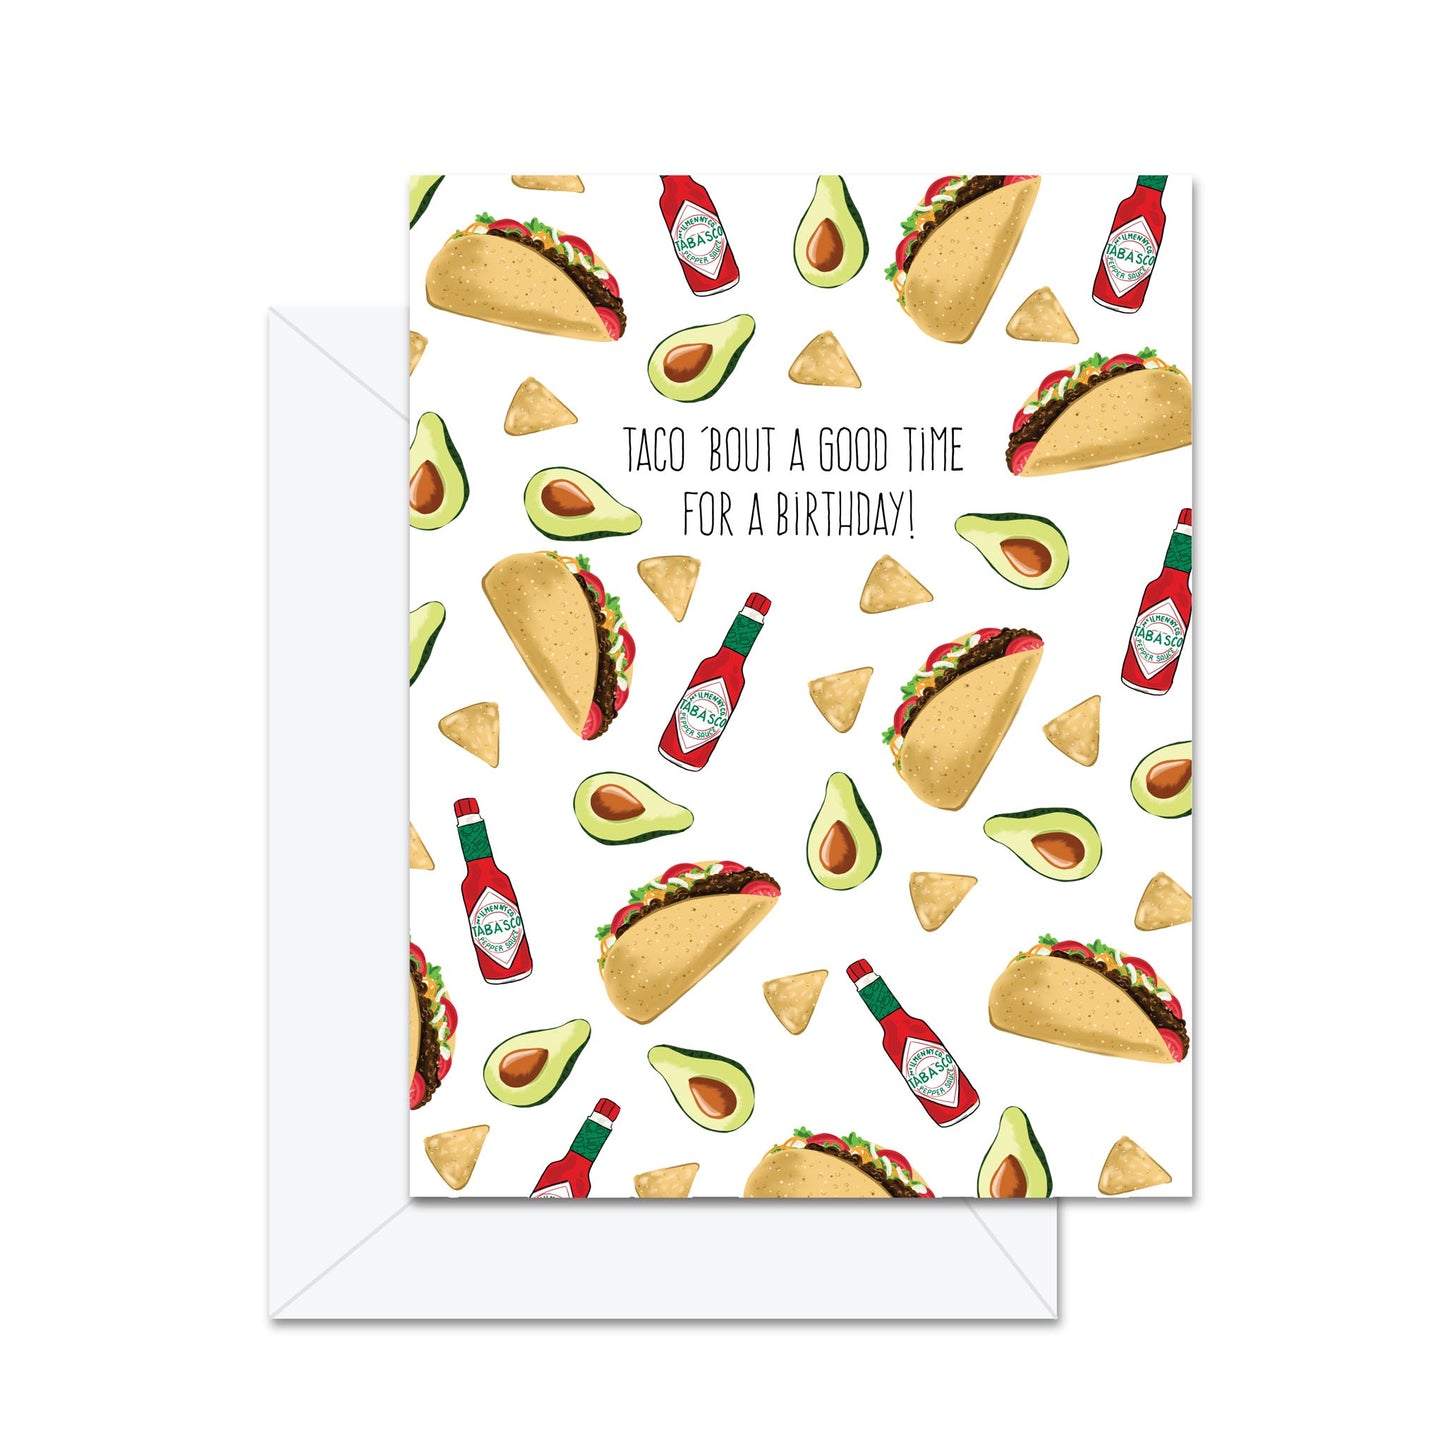 Taco 'Bout A Good Time For A Birthday! - Greeting Card